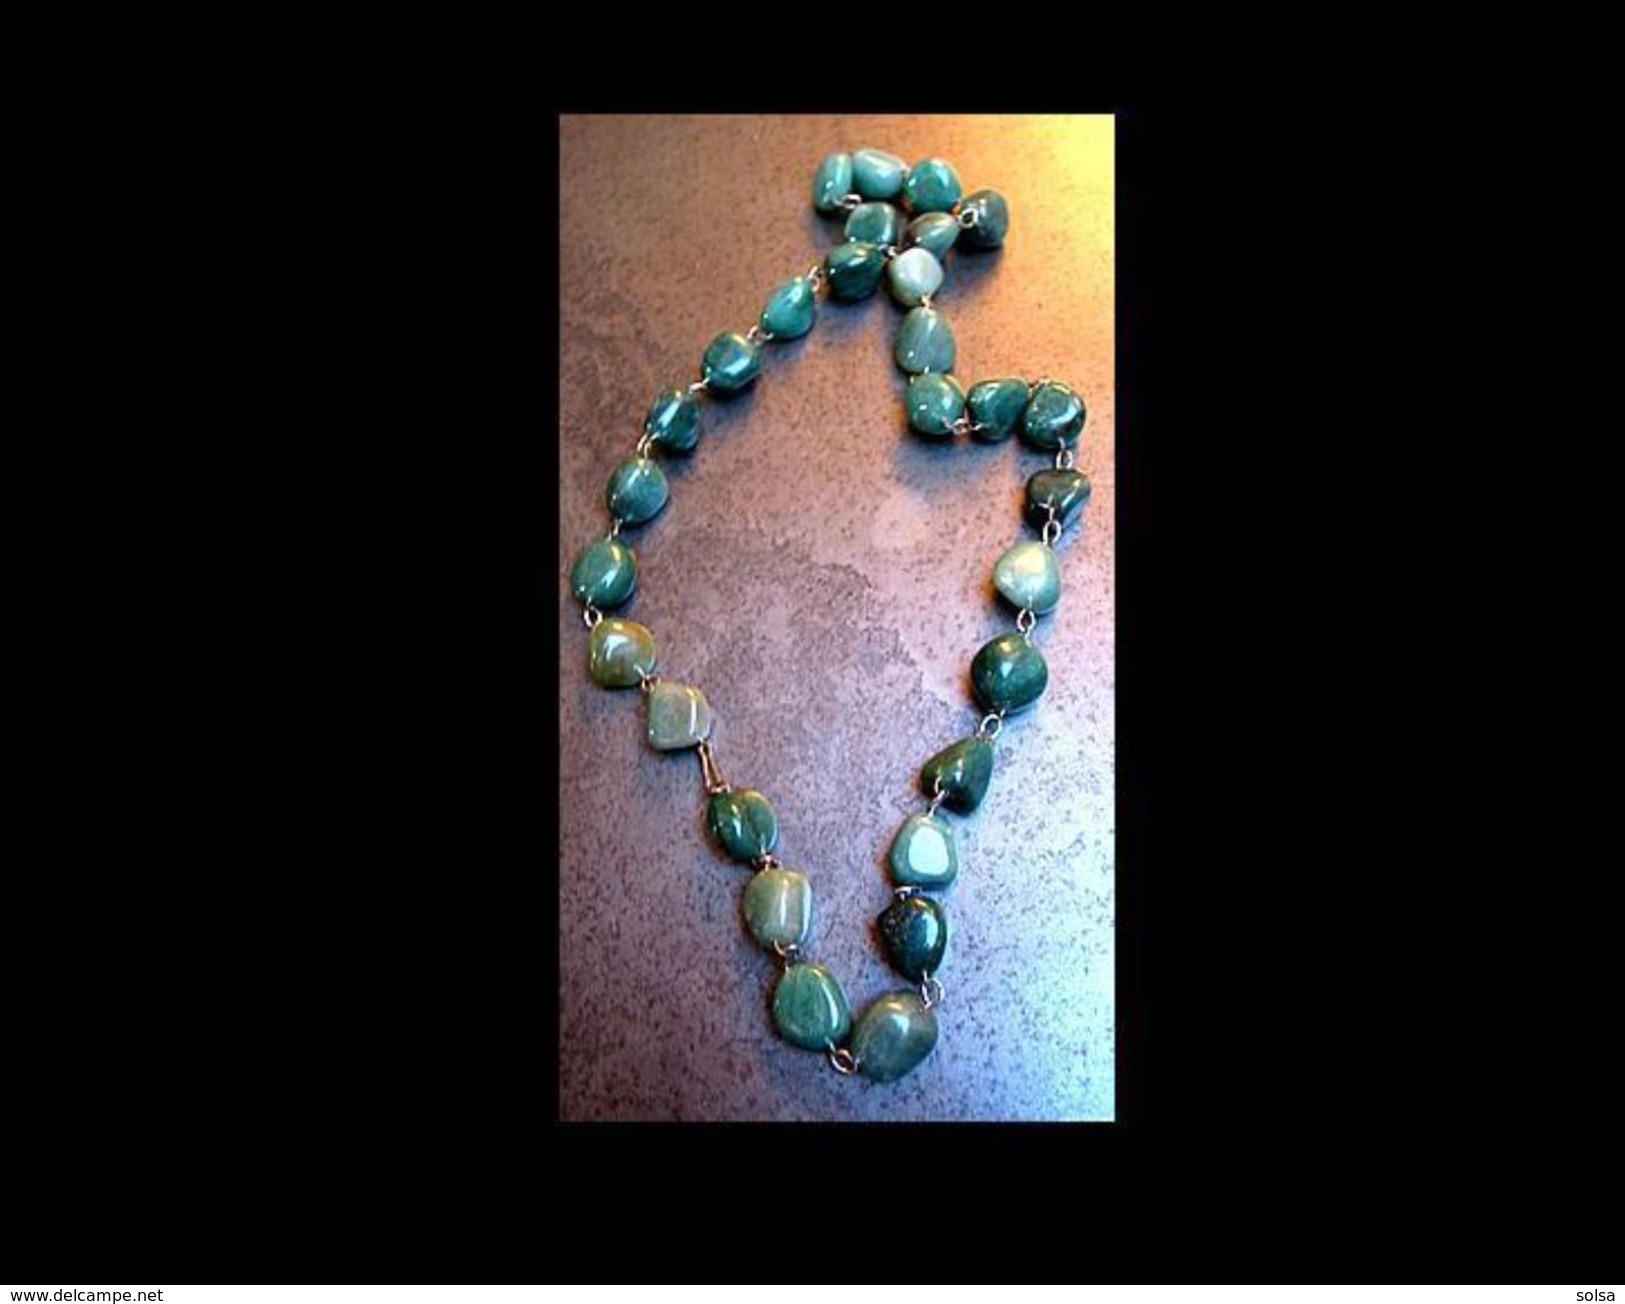 Beau Collier En Pierres Années 60 / Great Stone Necklace From The 60's - Necklaces/Chains